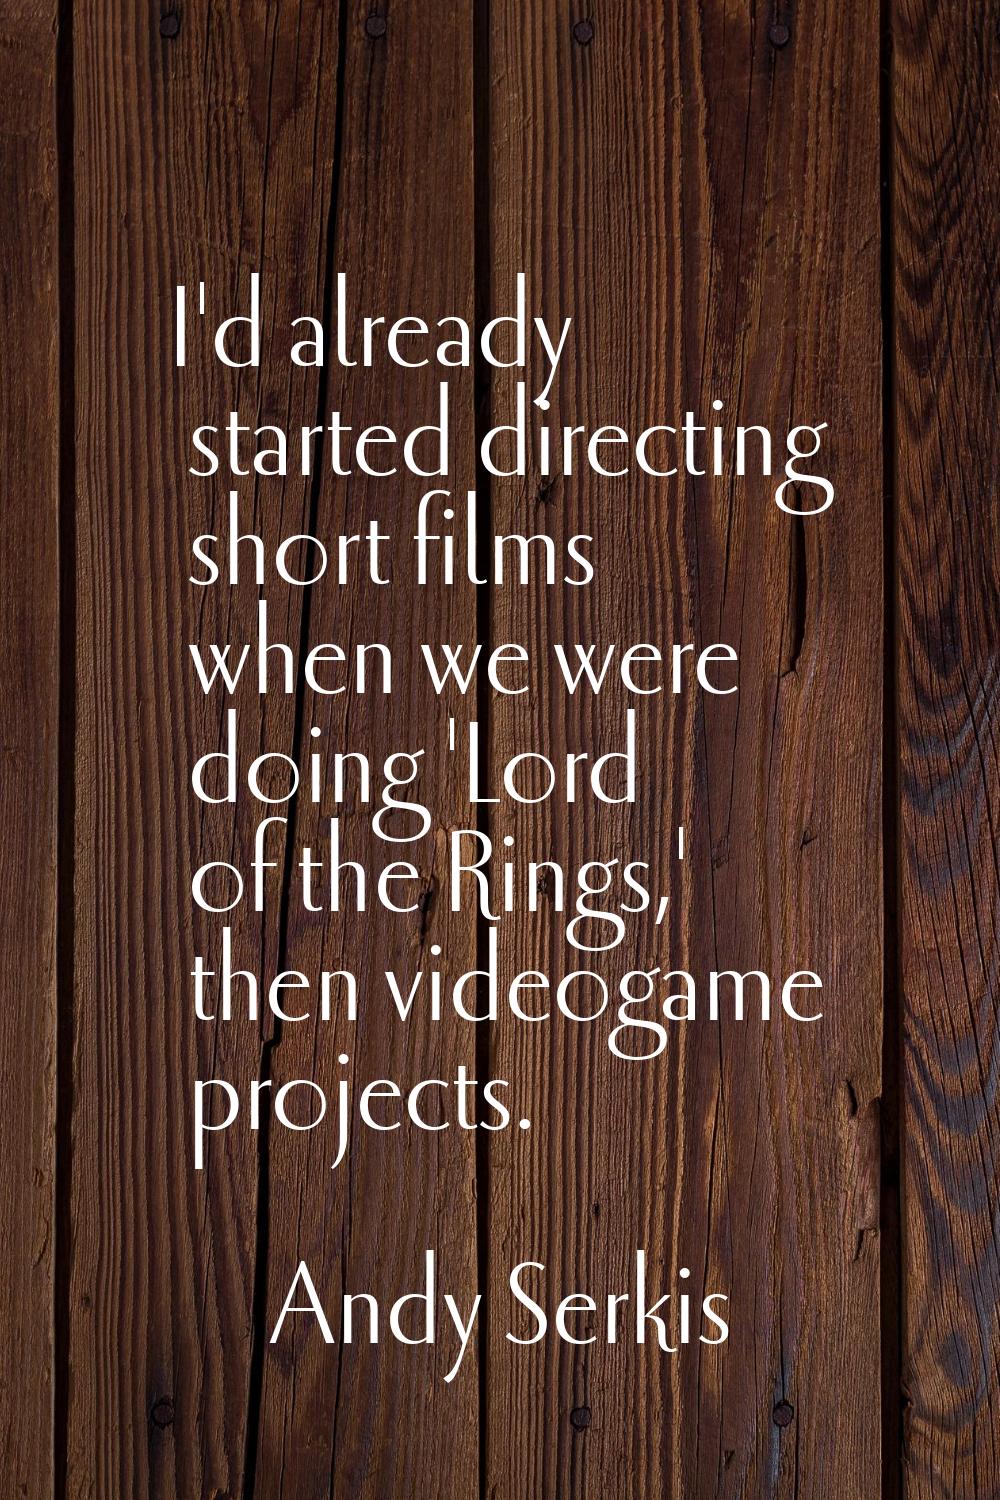 I'd already started directing short films when we were doing 'Lord of the Rings,' then videogame pr